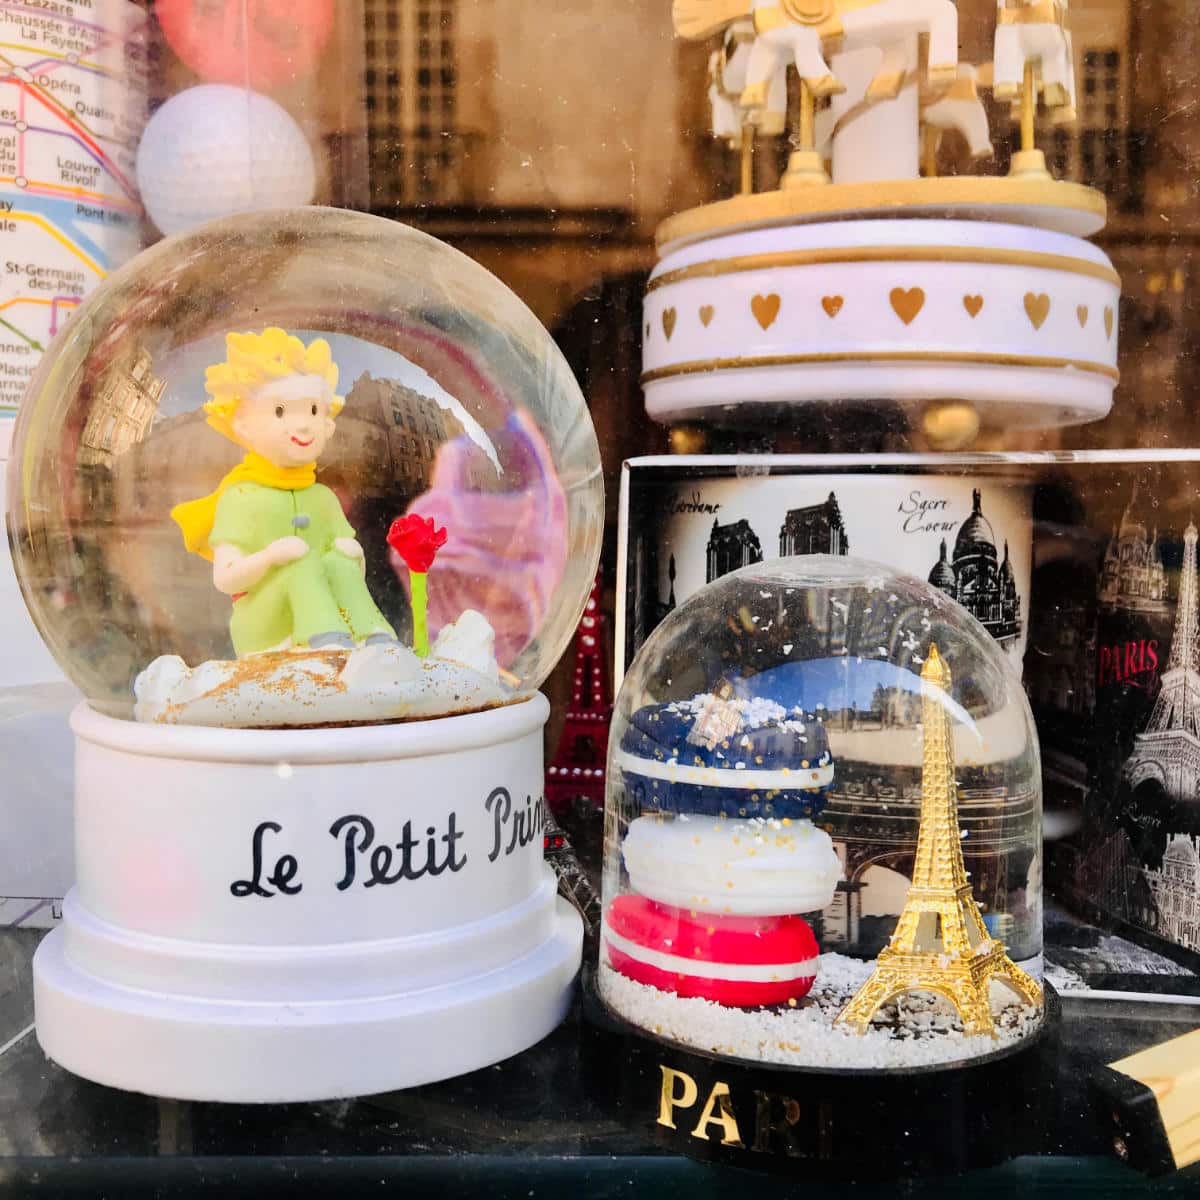 The character of Little Prince in a snowglobe in a shop in France